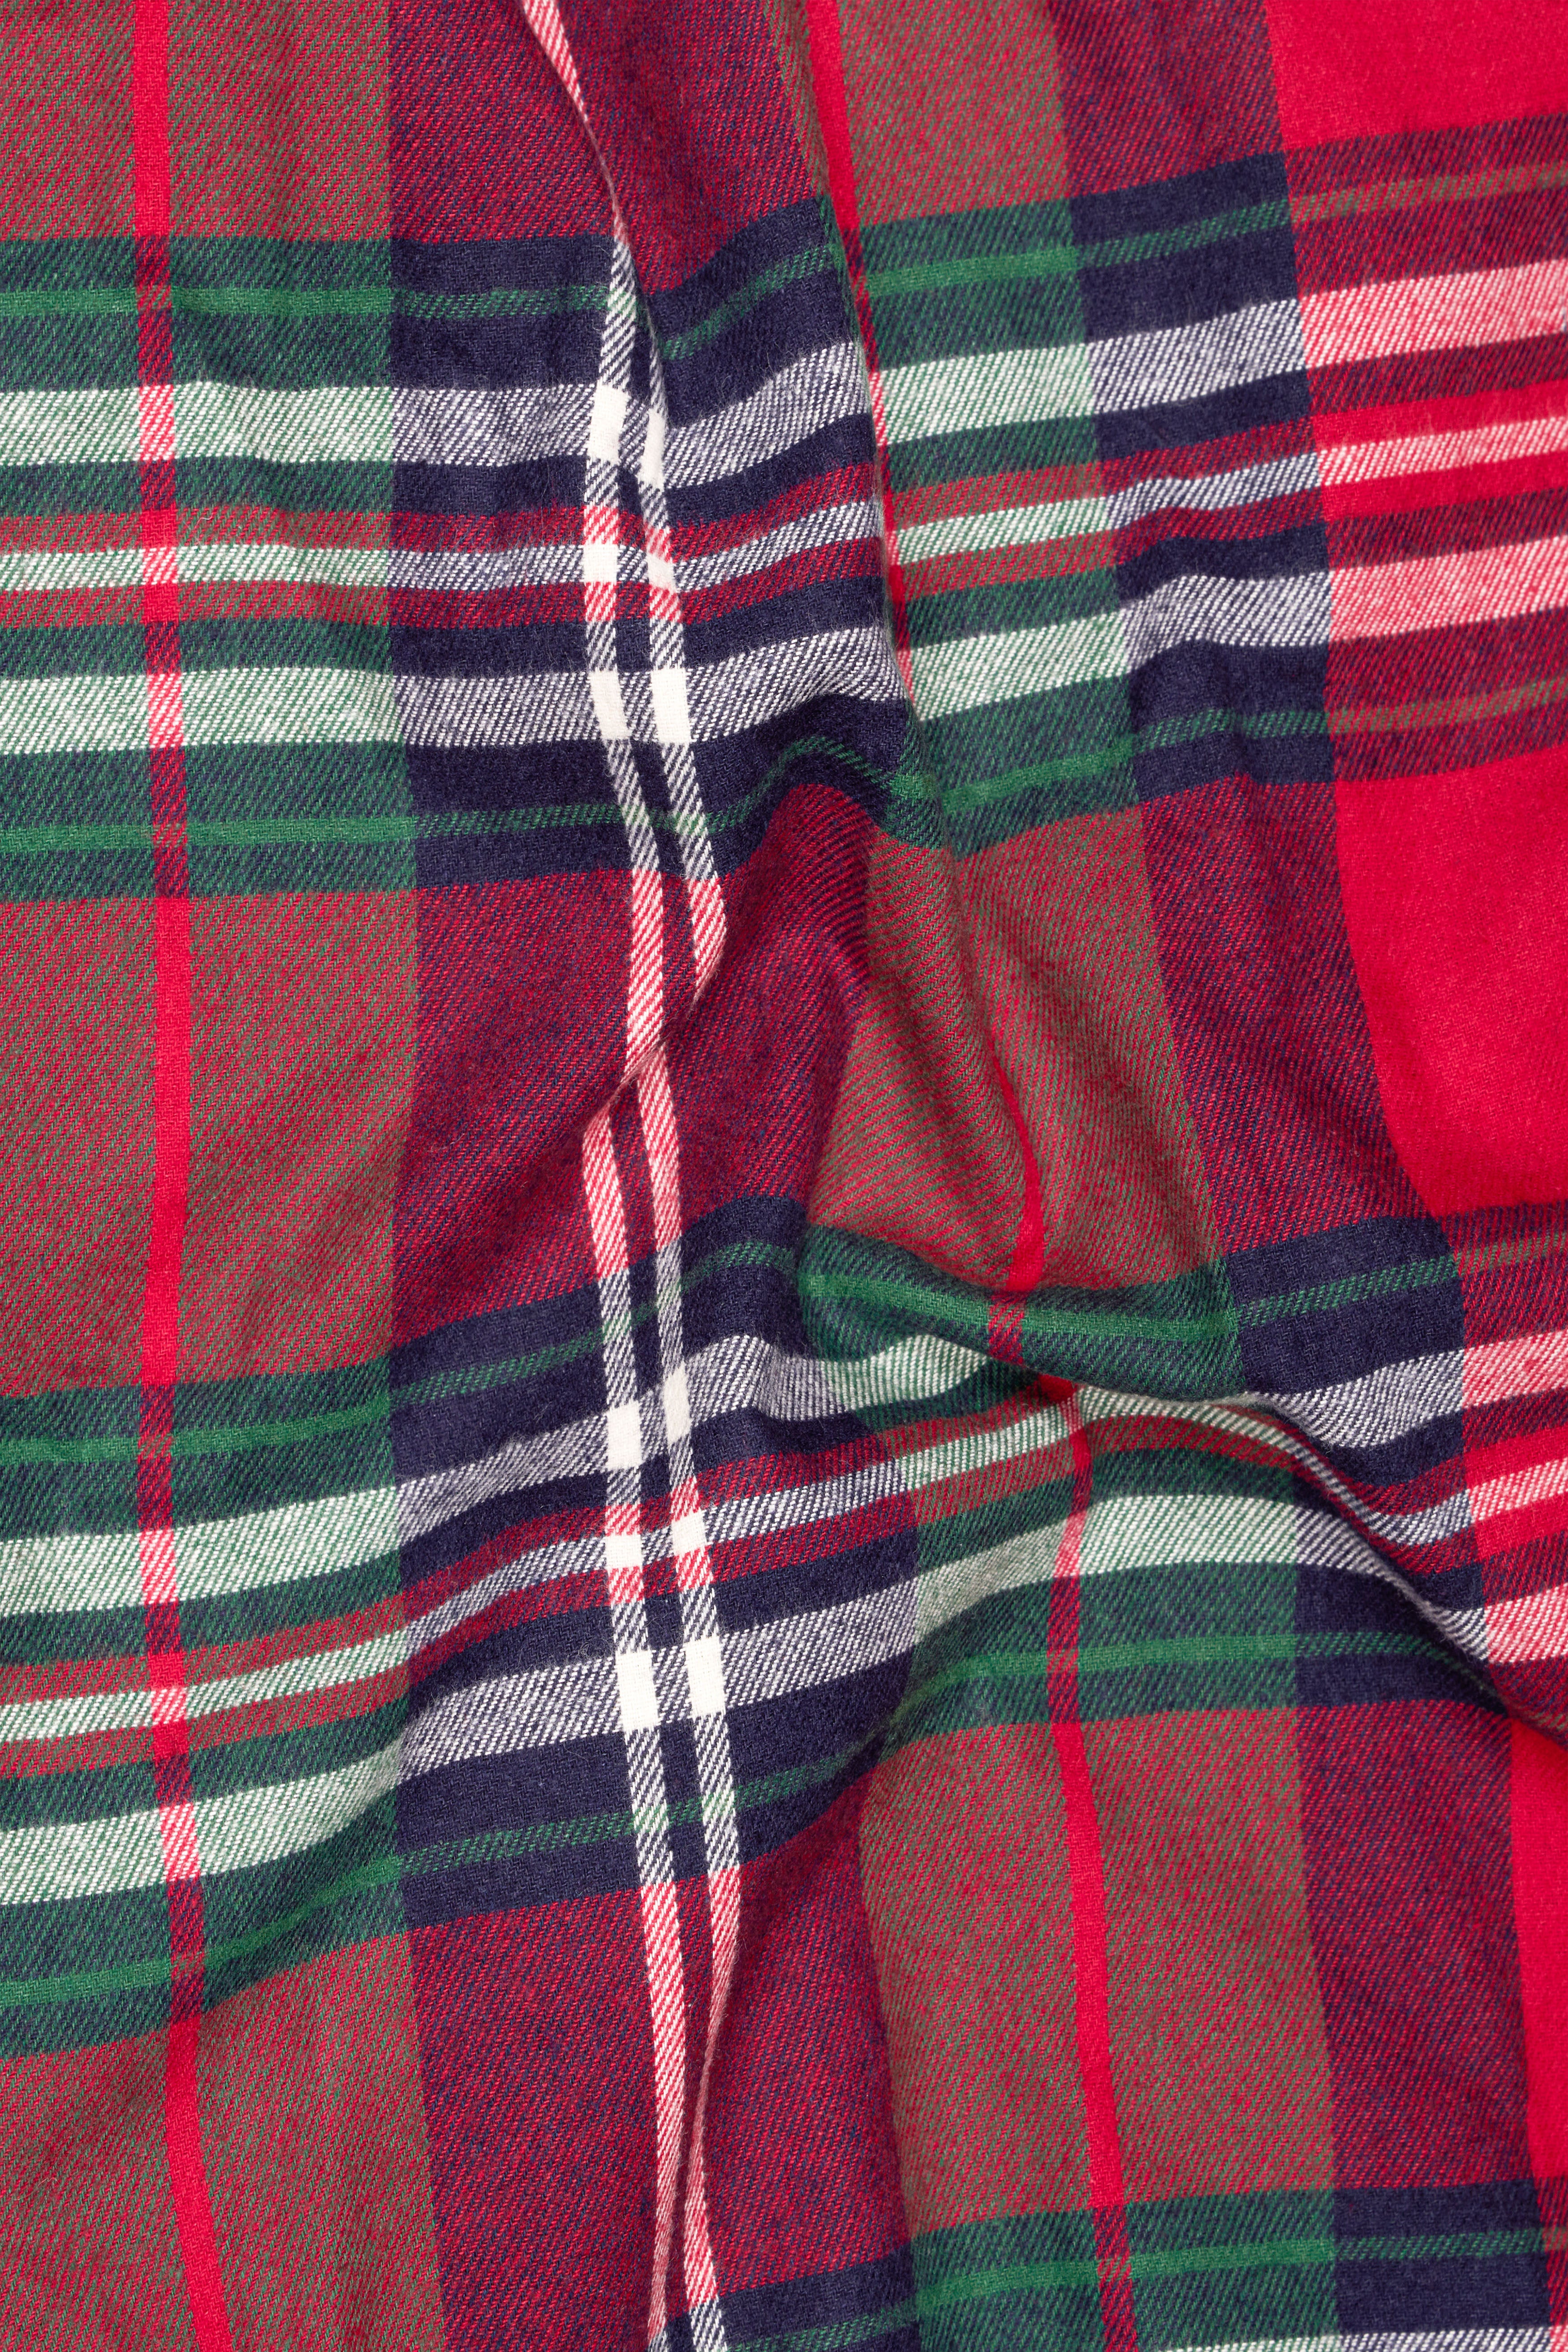 Carmine Red with Forest Green Plaid Button-Down Flannel Shirt 10149-BD-38, 10149-BD-H-38, 10149-BD-39, 10149-BD-H-39, 10149-BD-40, 10149-BD-H-40, 10149-BD-42, 10149-BD-H-42, 10149-BD-44, 10149-BD-H-44, 10149-BD-46, 10149-BD-H-46, 10149-BD-48, 10149-BD-H-48, 10149-BD-50, 10149-BD-H-50, 10149-BD-52, 10149-BD-H-52